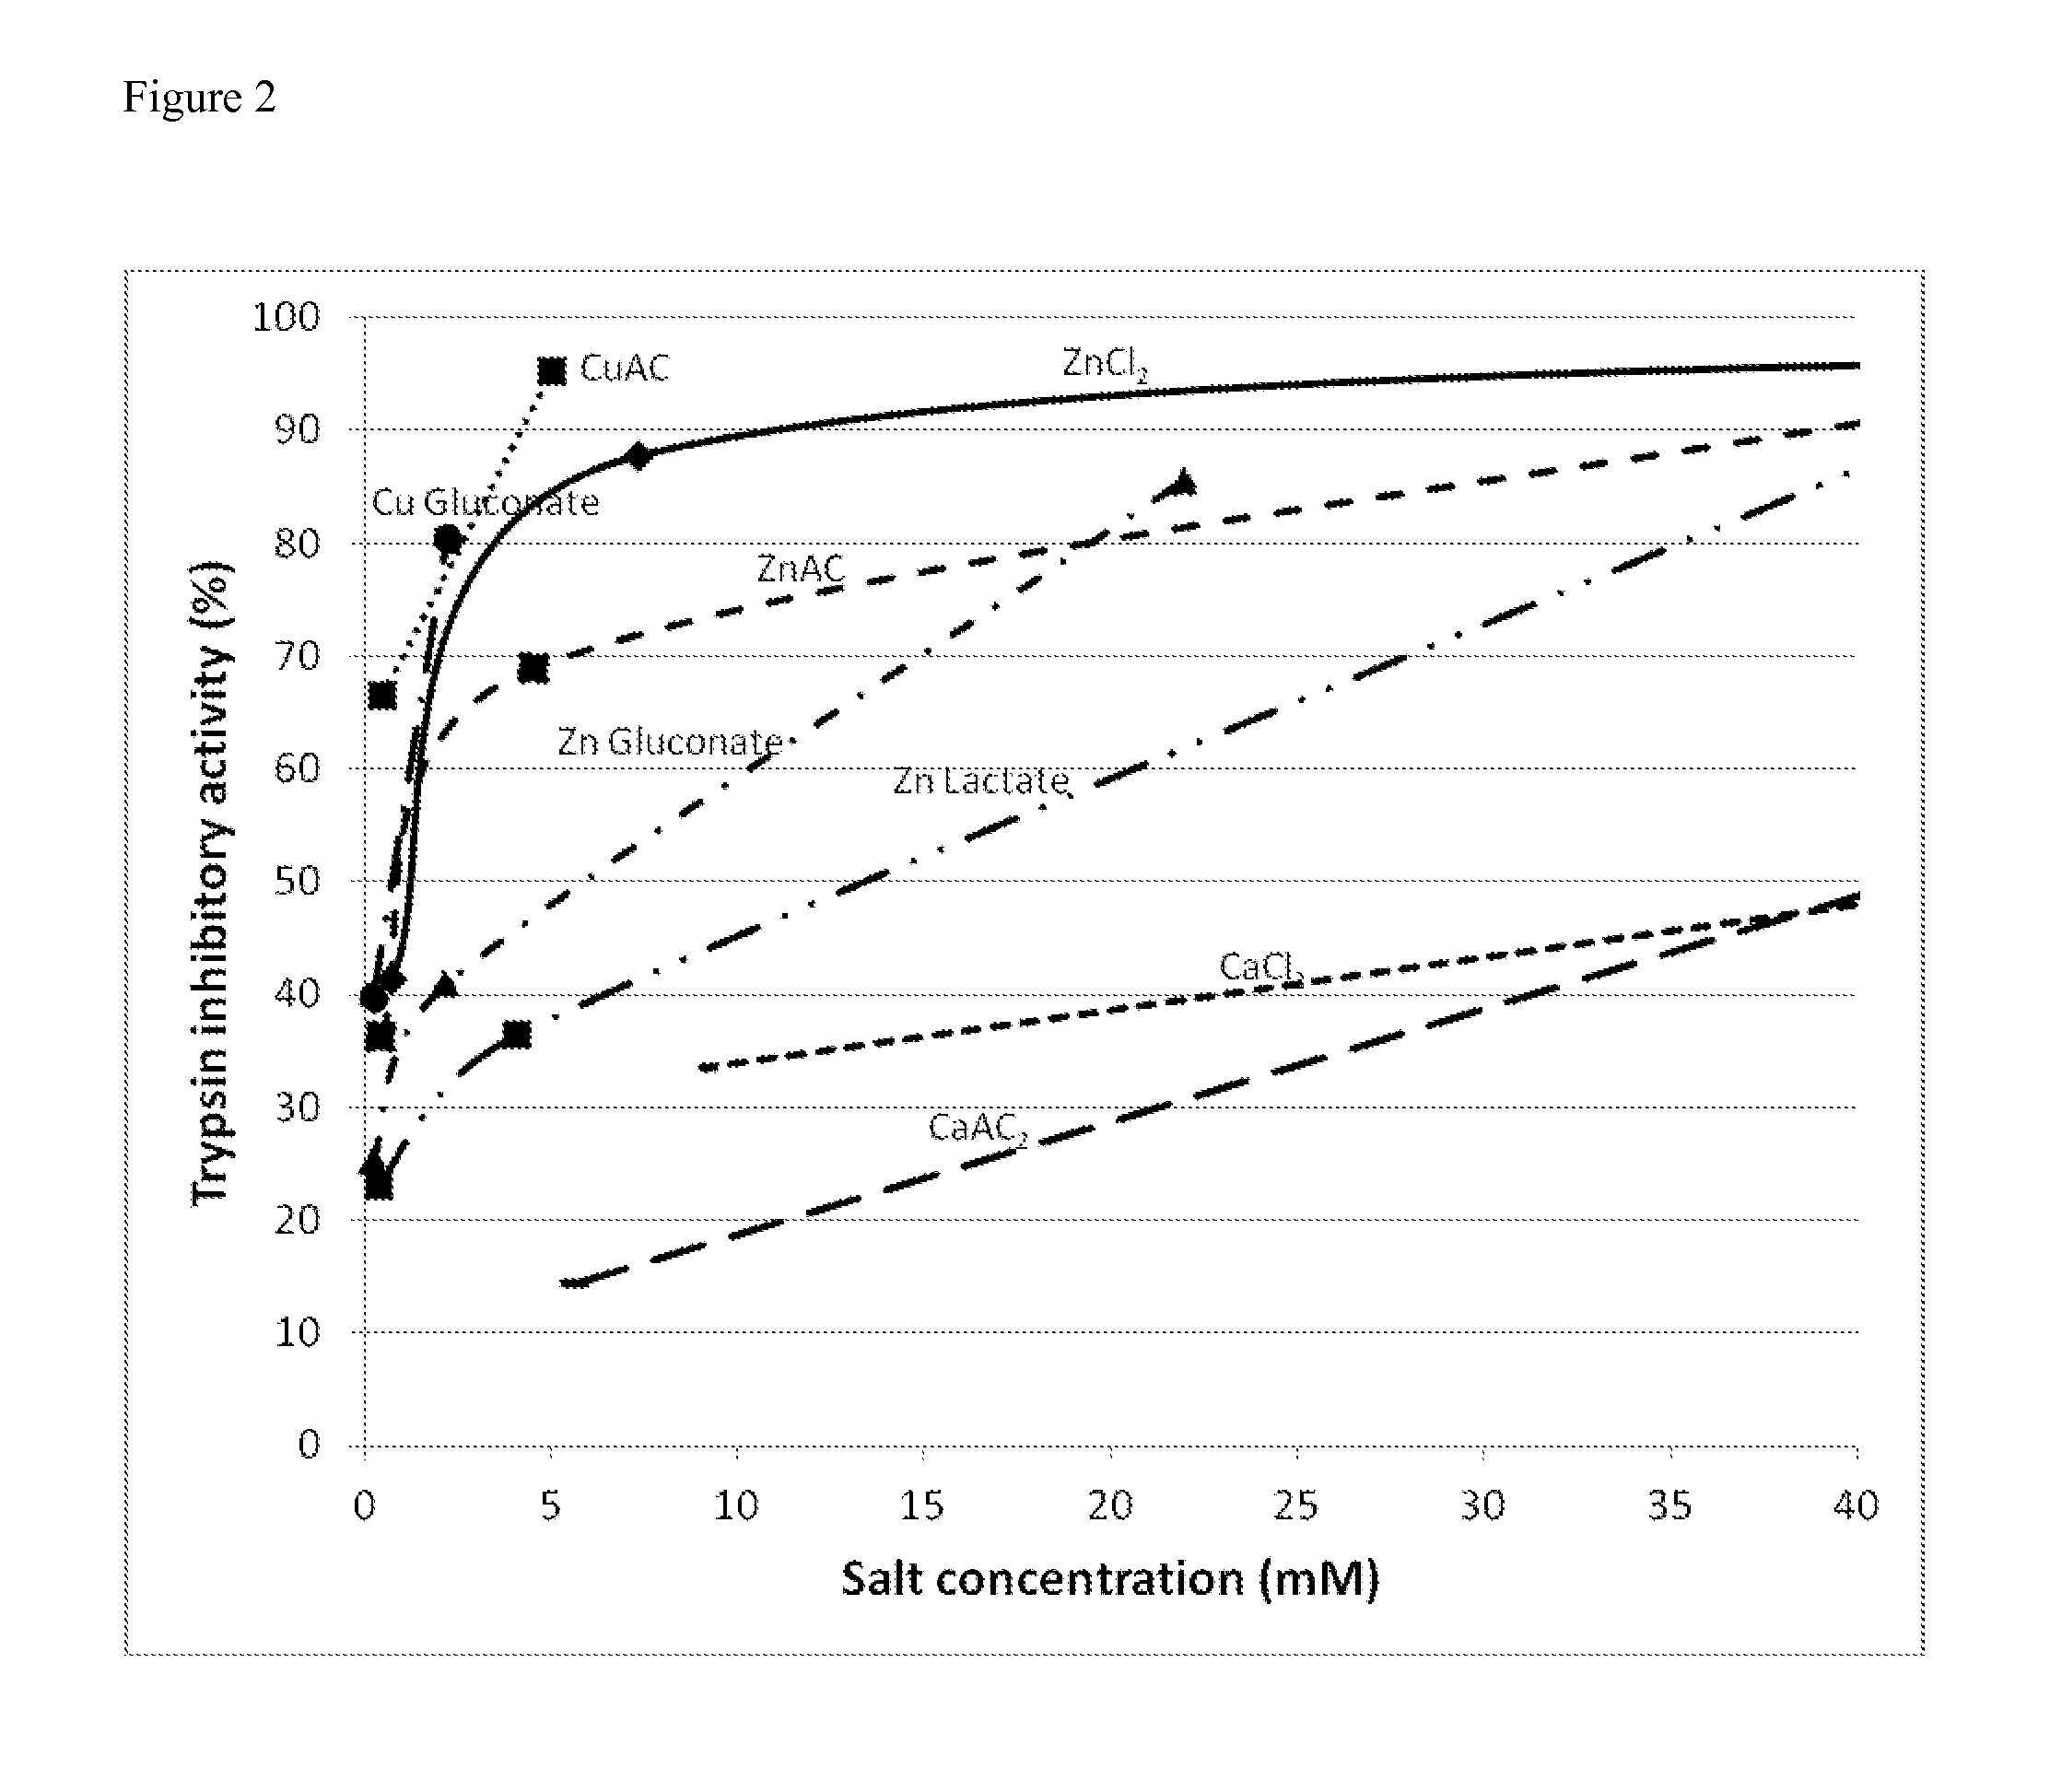 Divalent cation/talc containing compositions and methods for treating and/or preventing enzymatic irritation